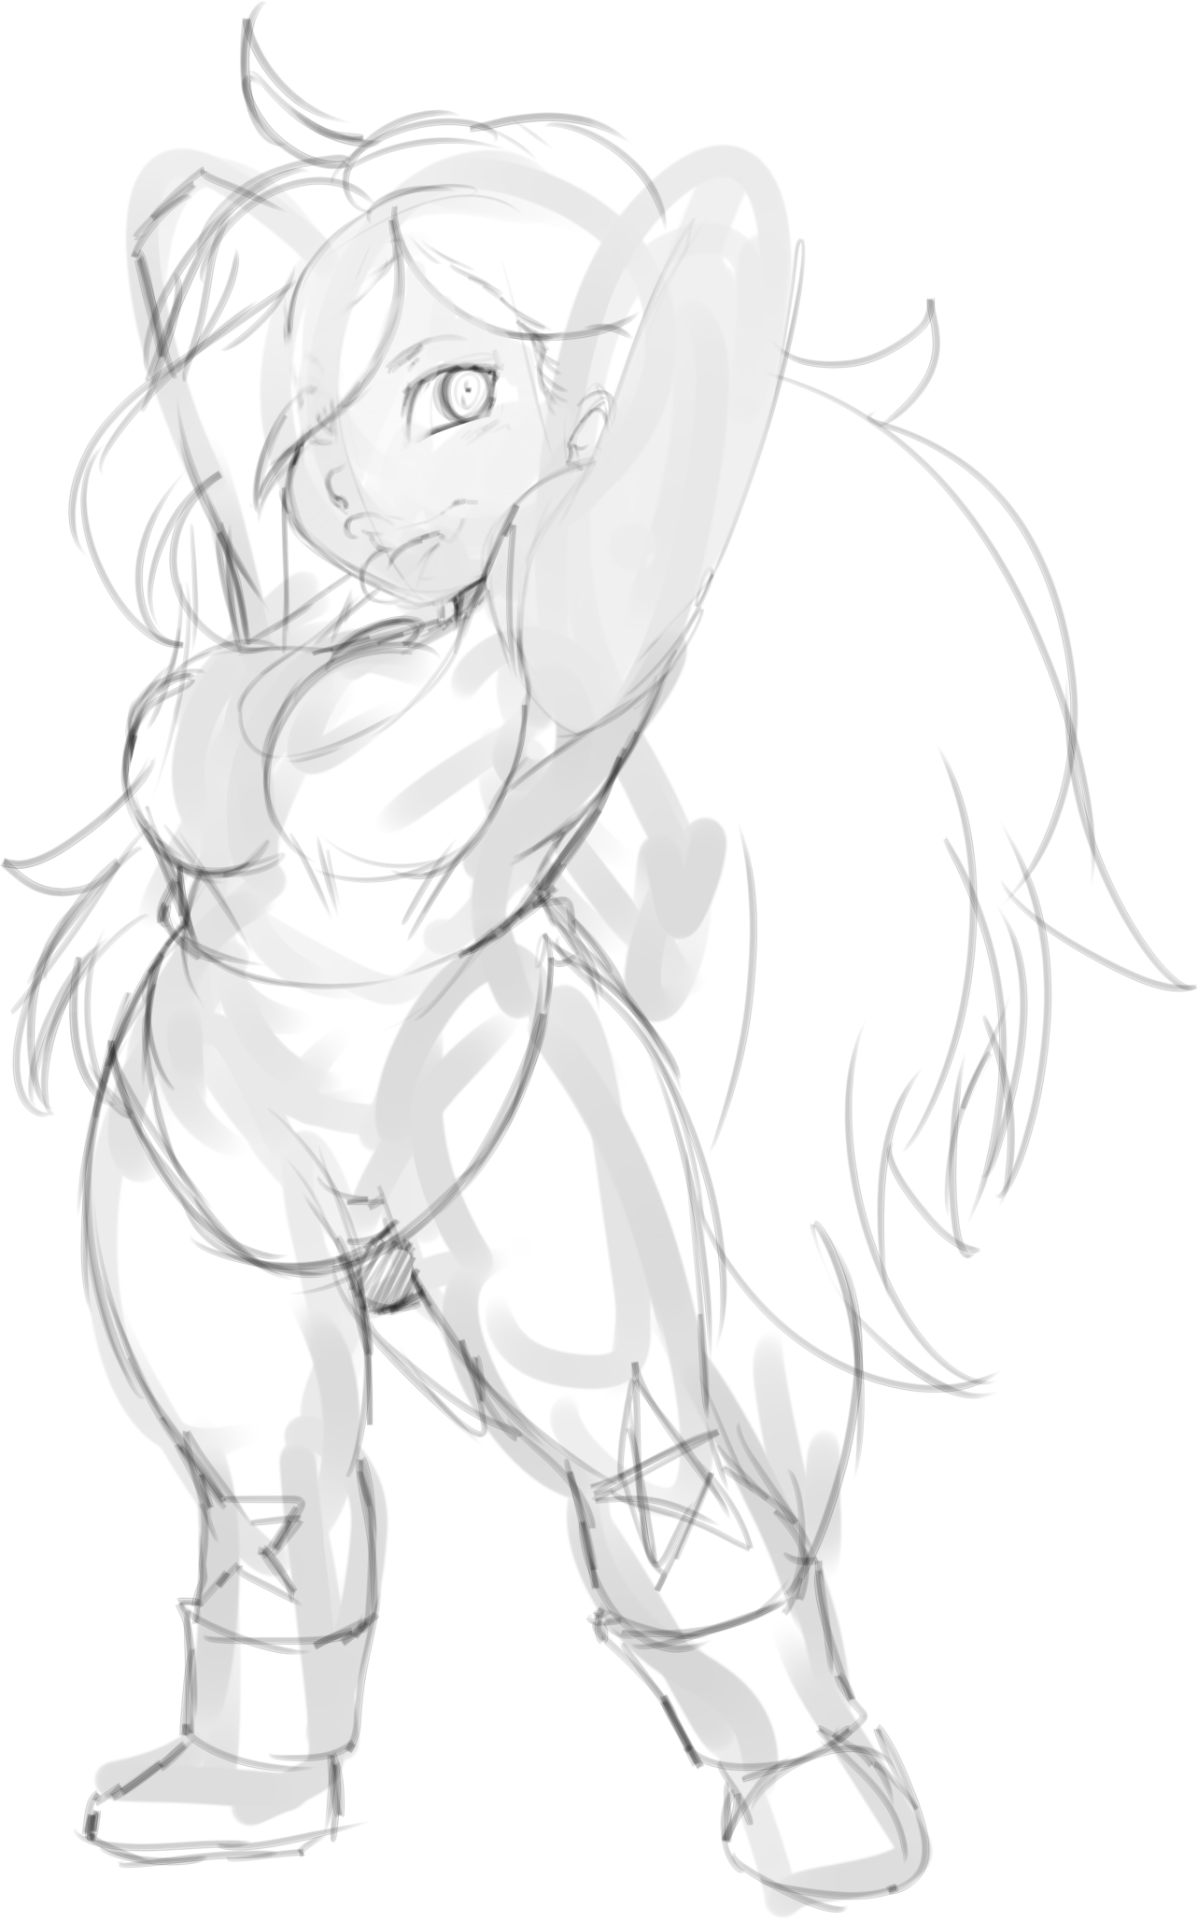 tovio-rogers:  i started to sketch this random amethyst but then my annoyingly talented